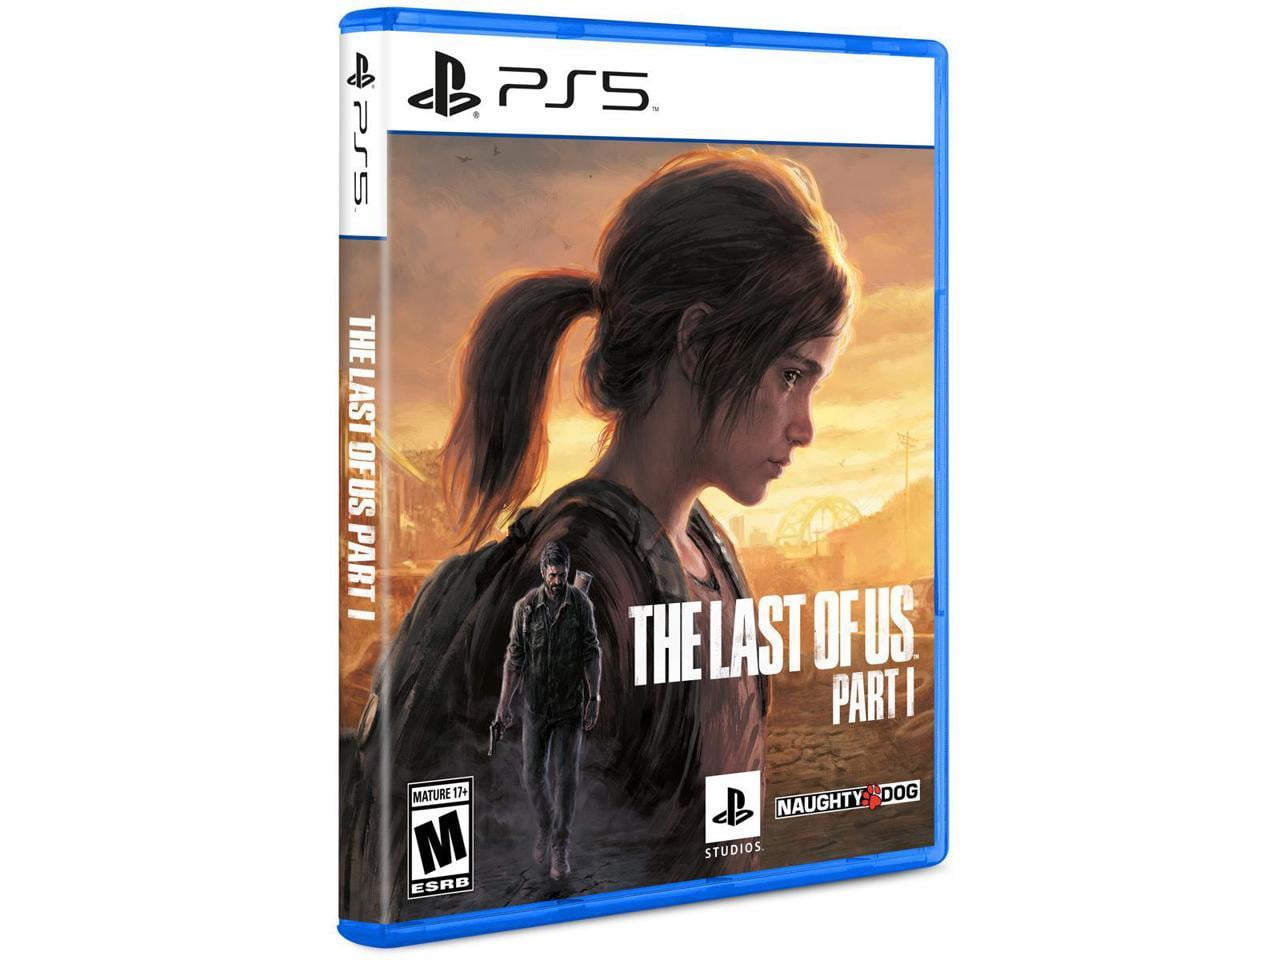 THE LAST OF US PS3 - VT GAMES